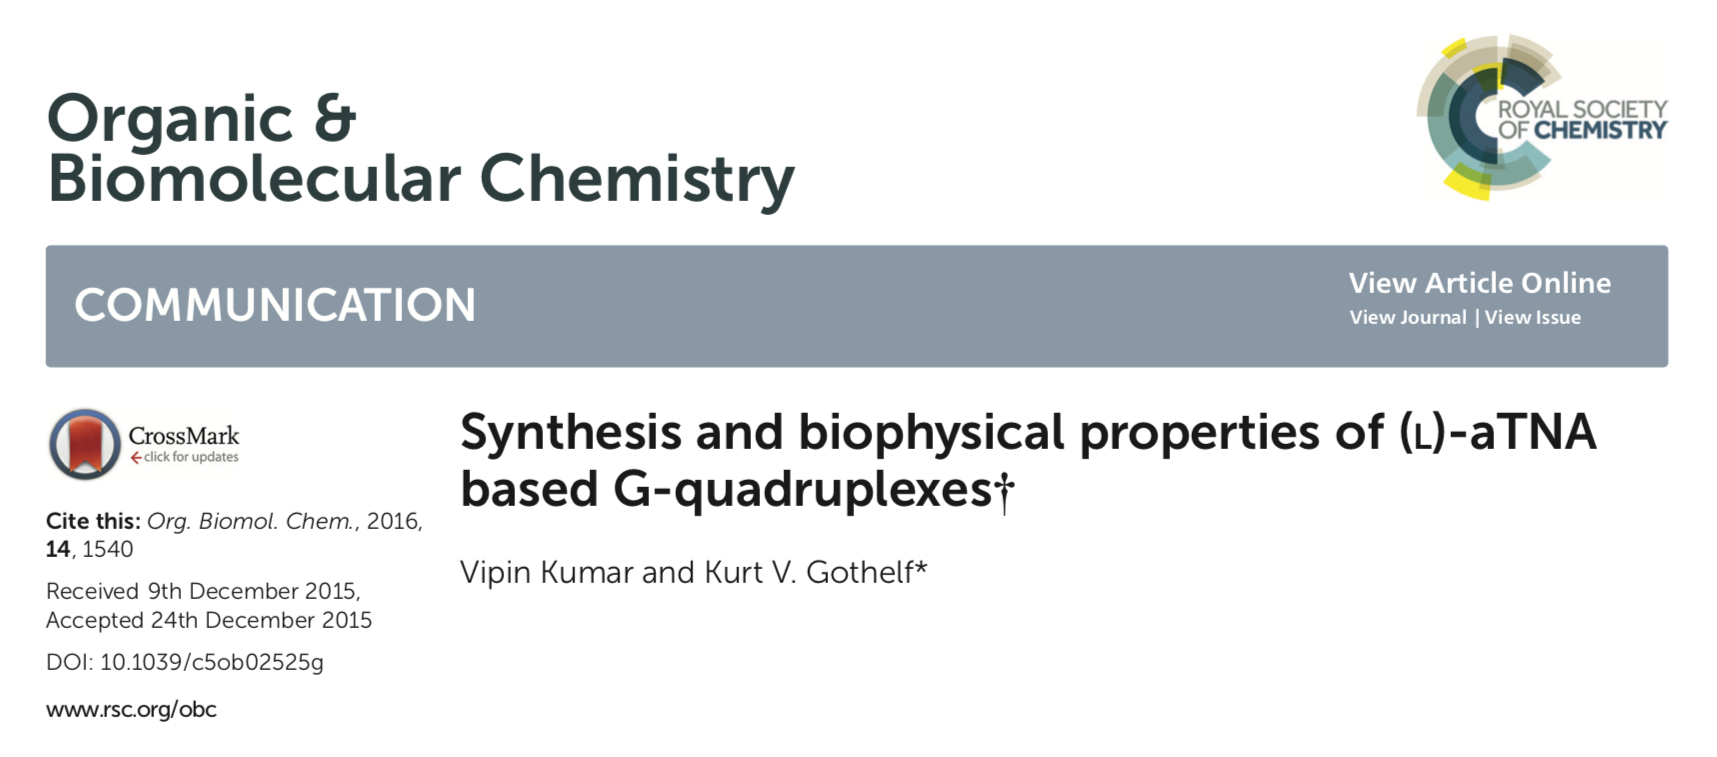 Screenshot from the article "synthesis and biophysical proterties of (L)-aTNA based G-quadruplexes" published in Organic & Biomolecular Chemistry